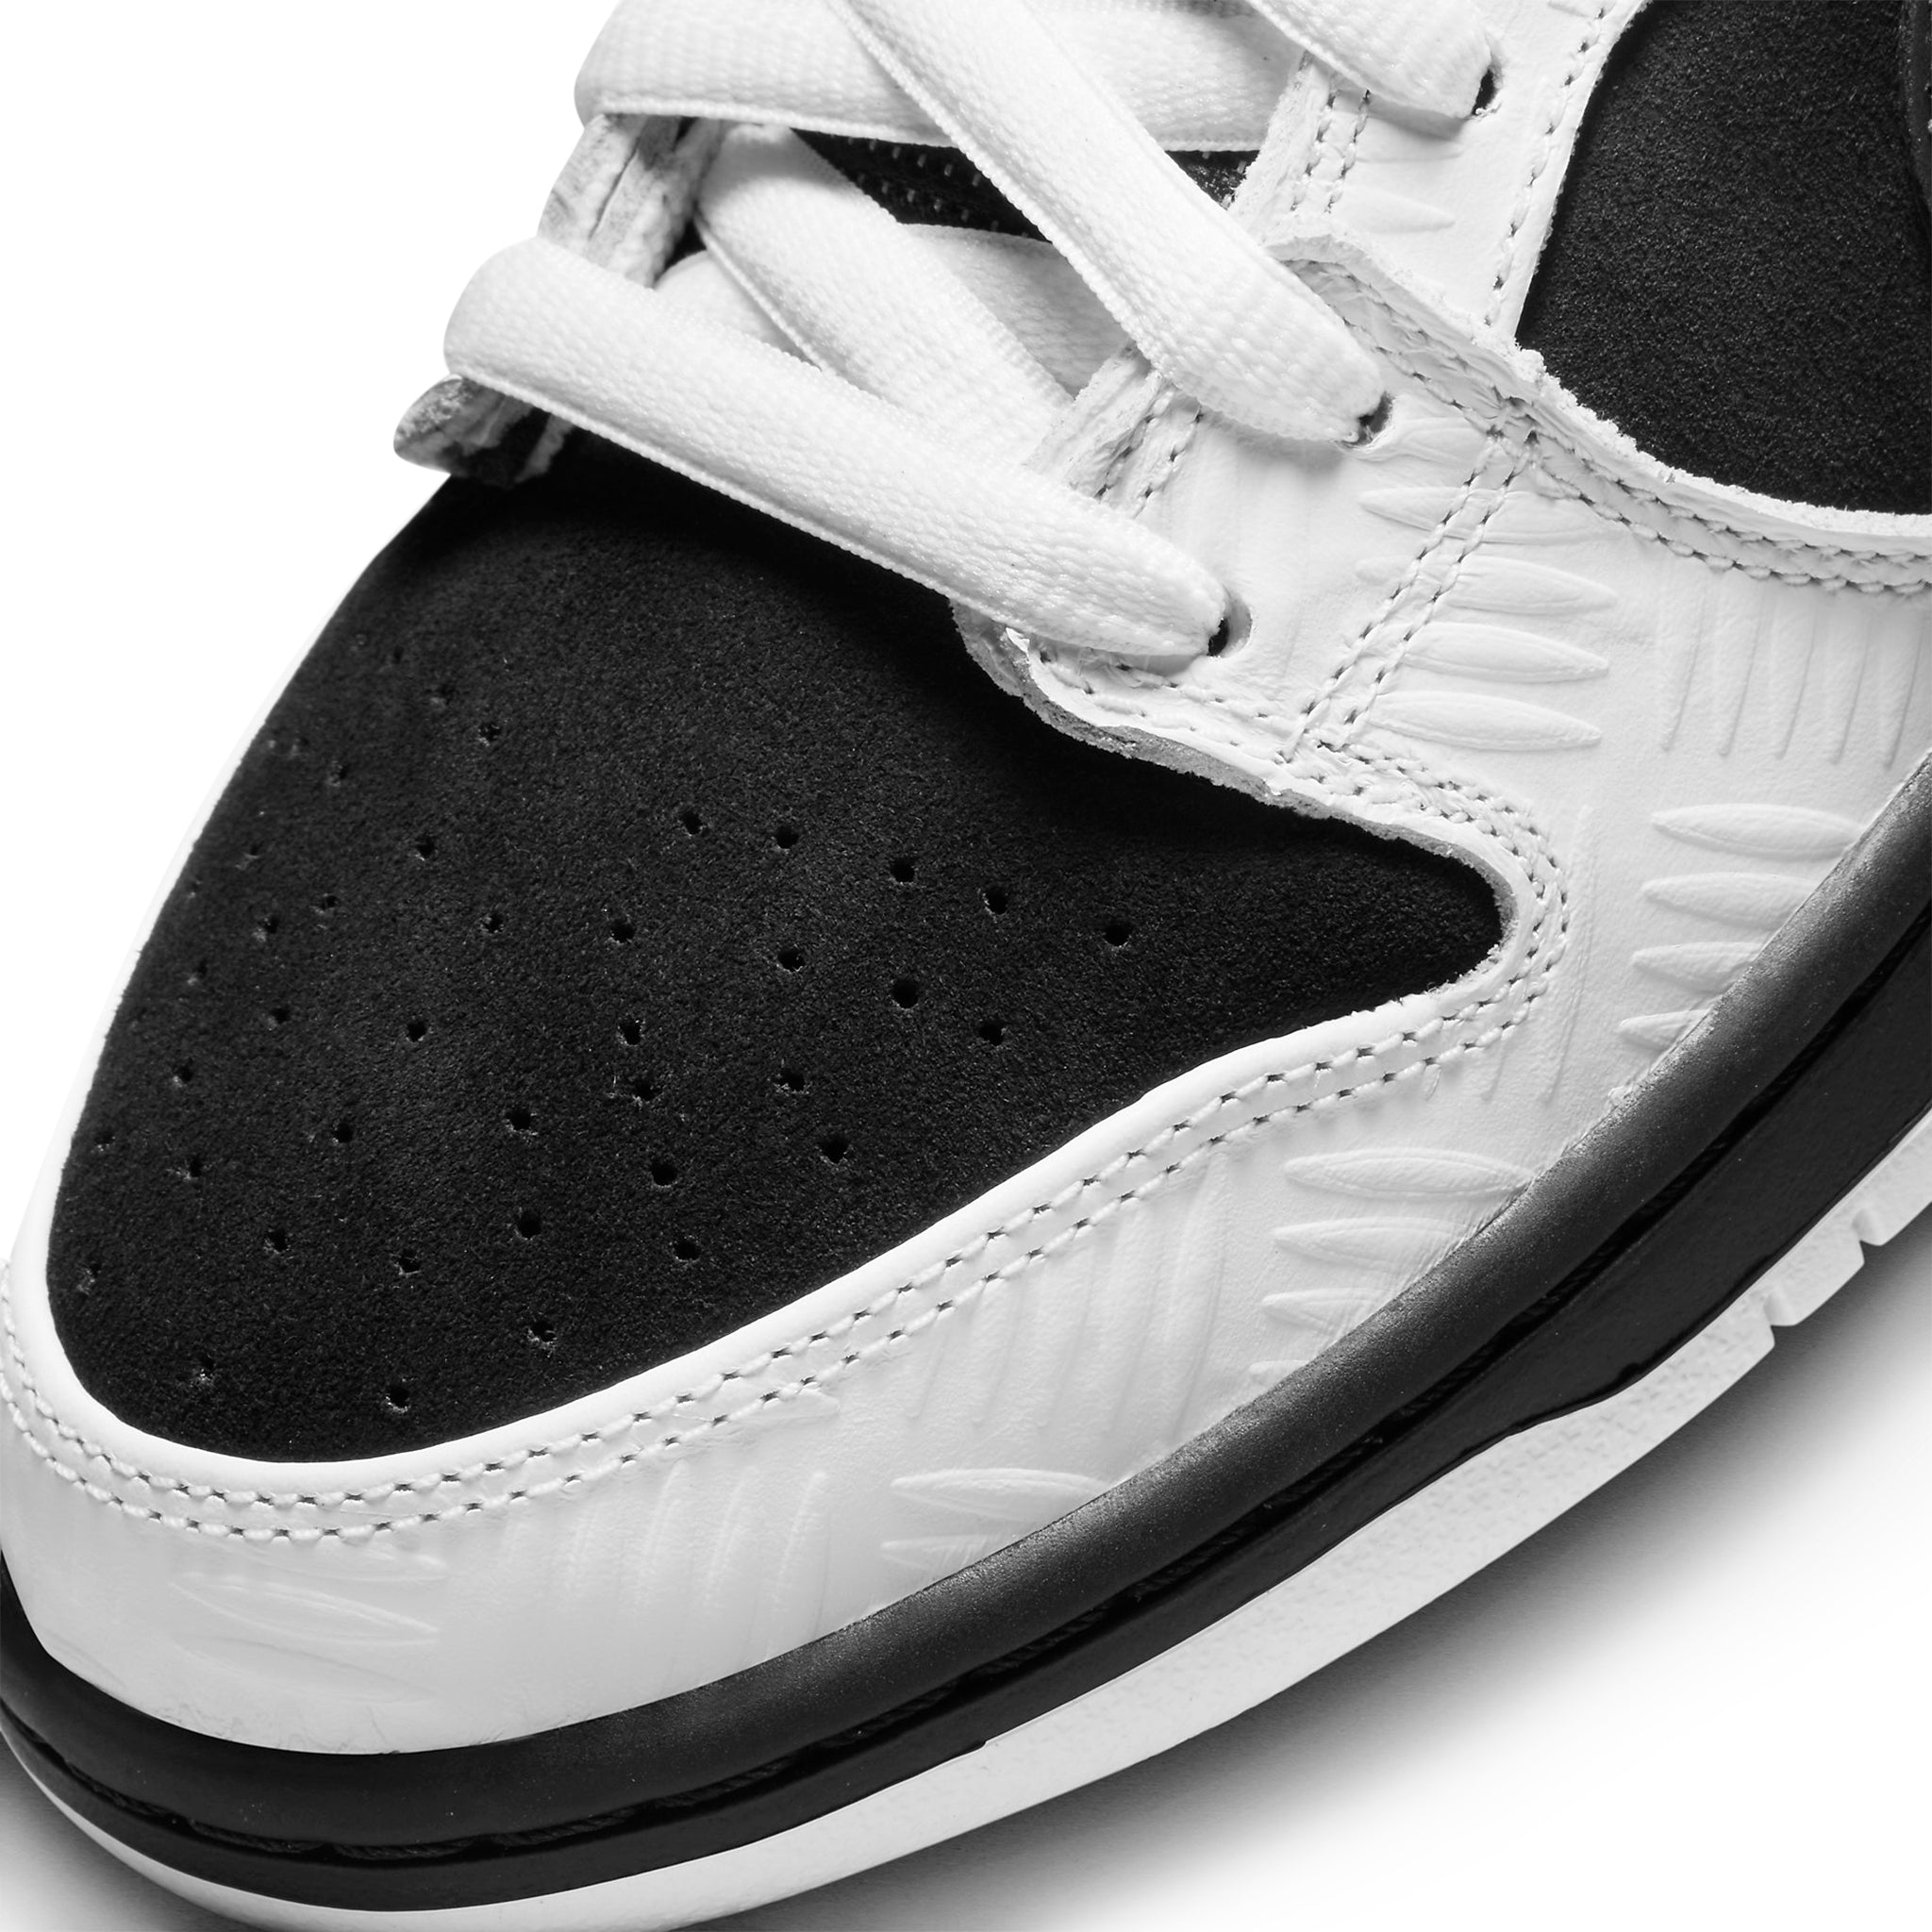 Toe box side view of Tightbooth X Nike SB Dunk Low Black White FD2629-100